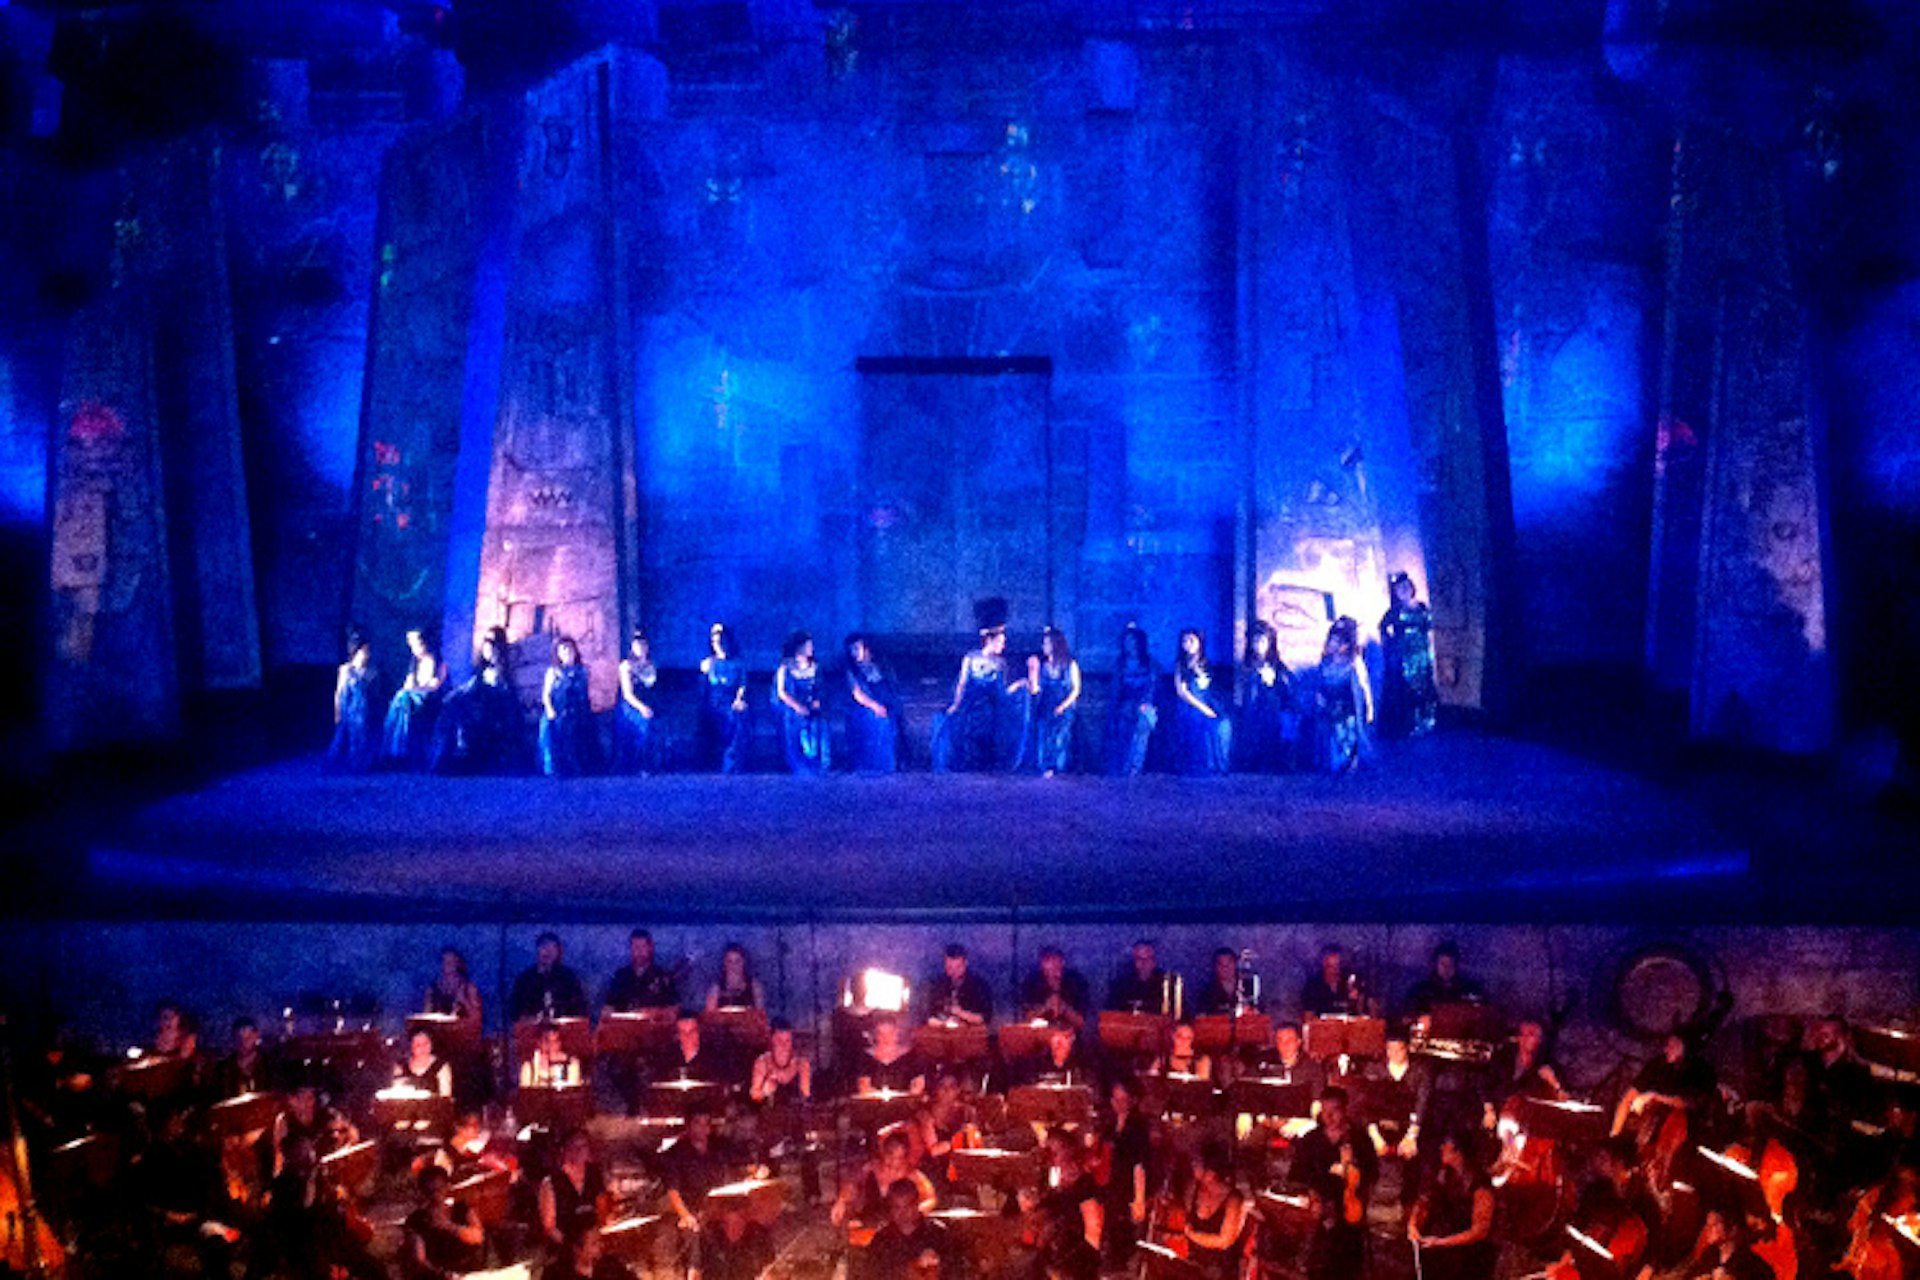 A performance of Aida at Aspendos during the 2014 Opera and Ballet Festival. Image by Jo Cooke / Lonely Planet